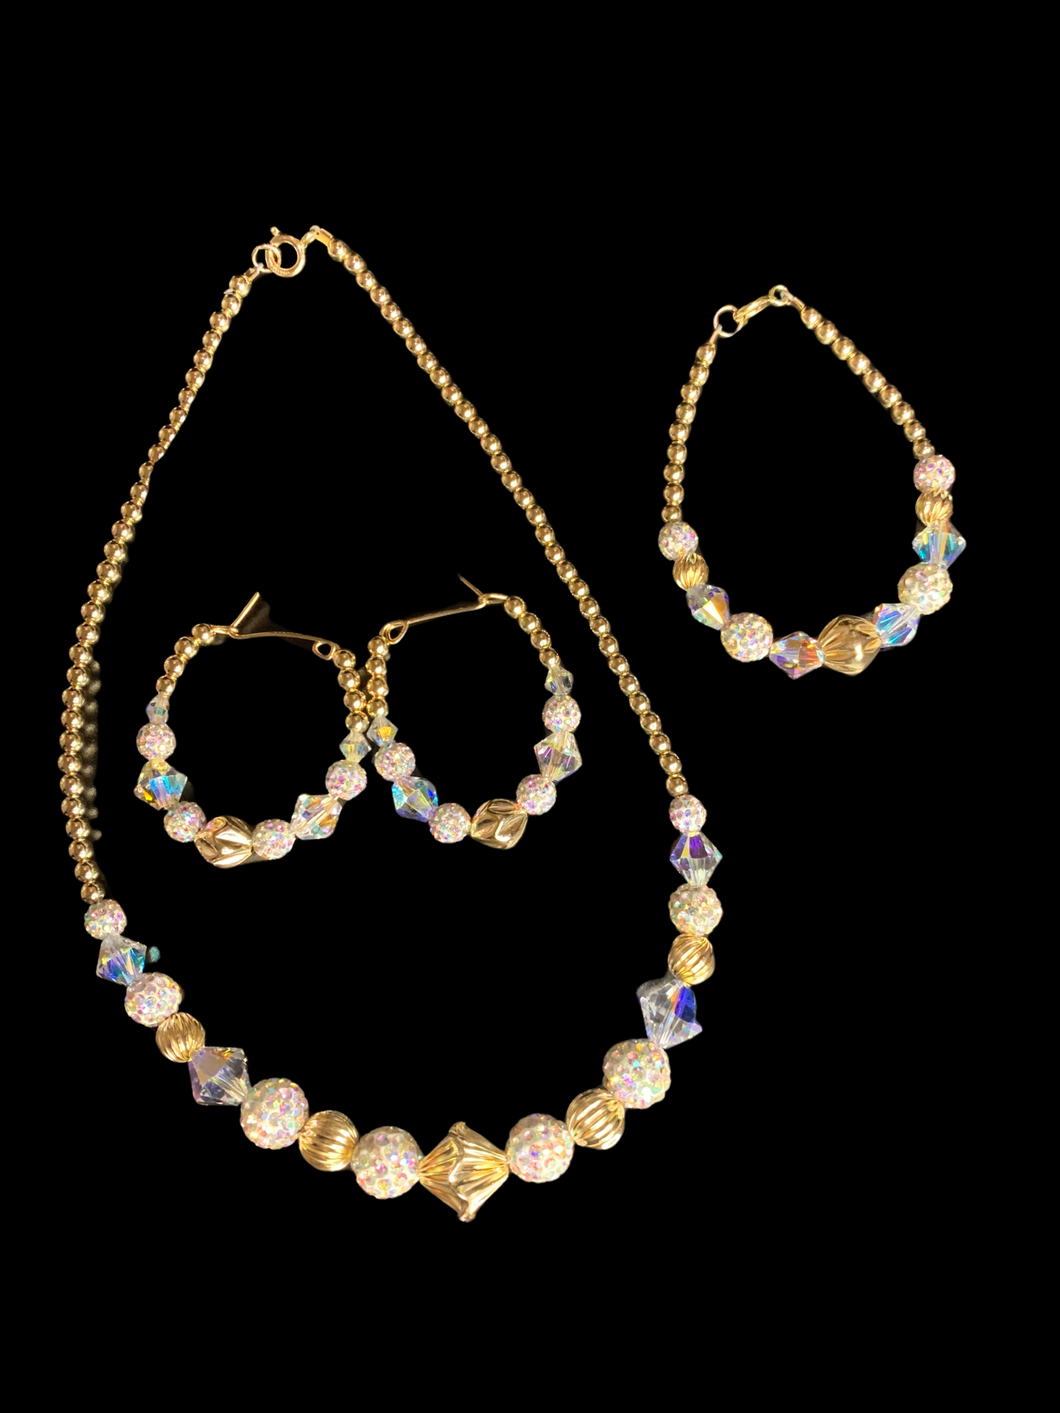 3 piece Gold Filled and Shambella beaded Set